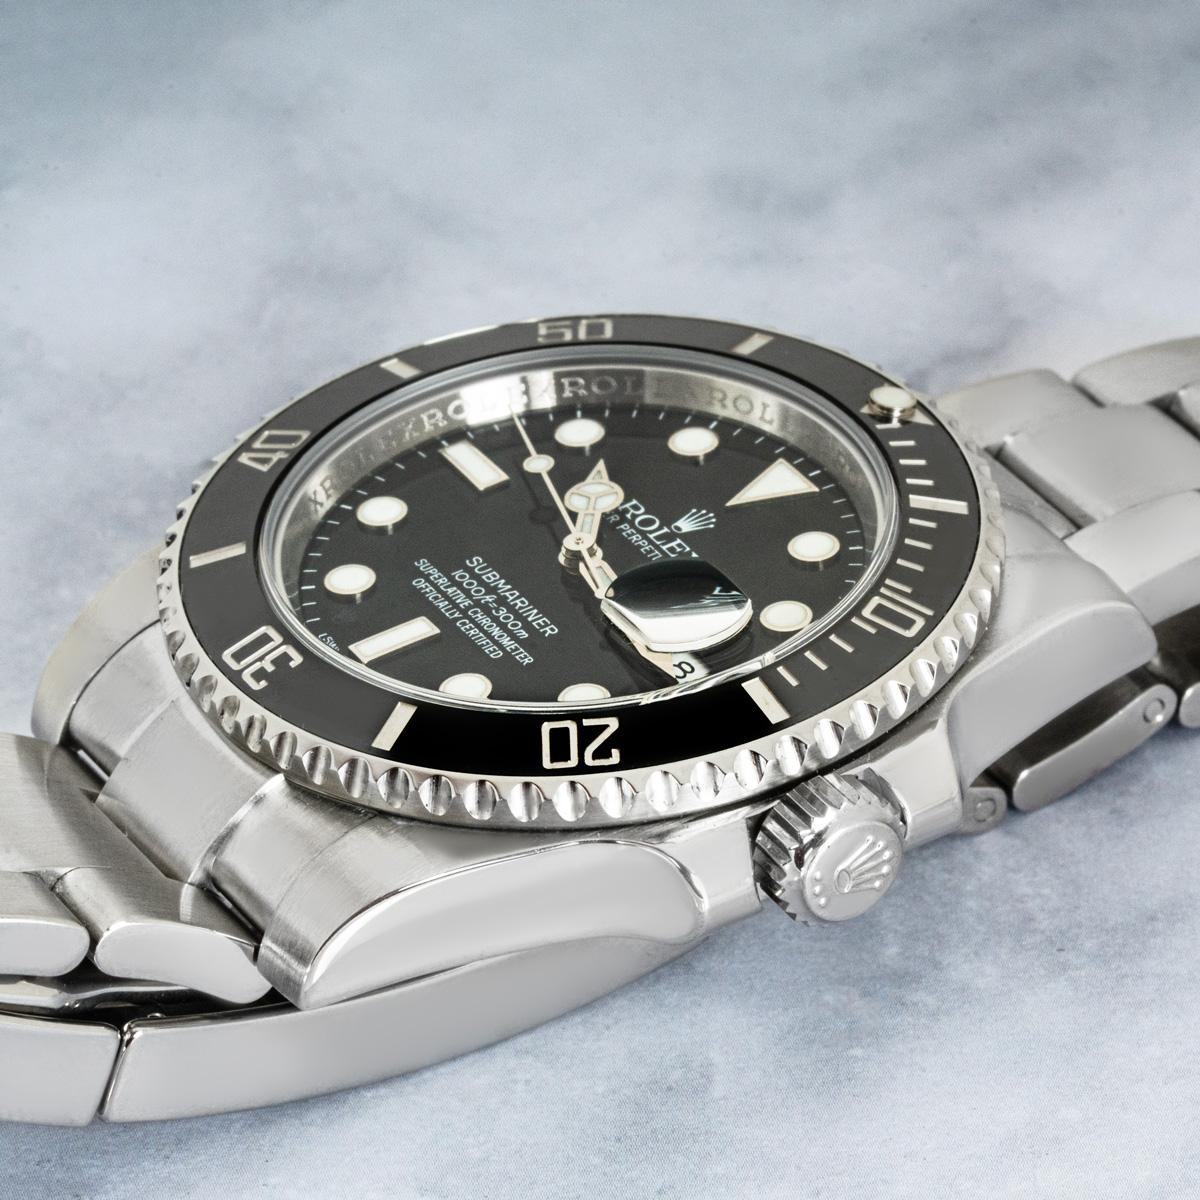 A Submariner Date in stainless steel by Rolex. Featuring a black dial, a date aperture and a uni-directional rotatable bezel with 60-minute graduations. Fitted with an Oyster bracelet and an Oysterlock deployant clasp. The watch also features a